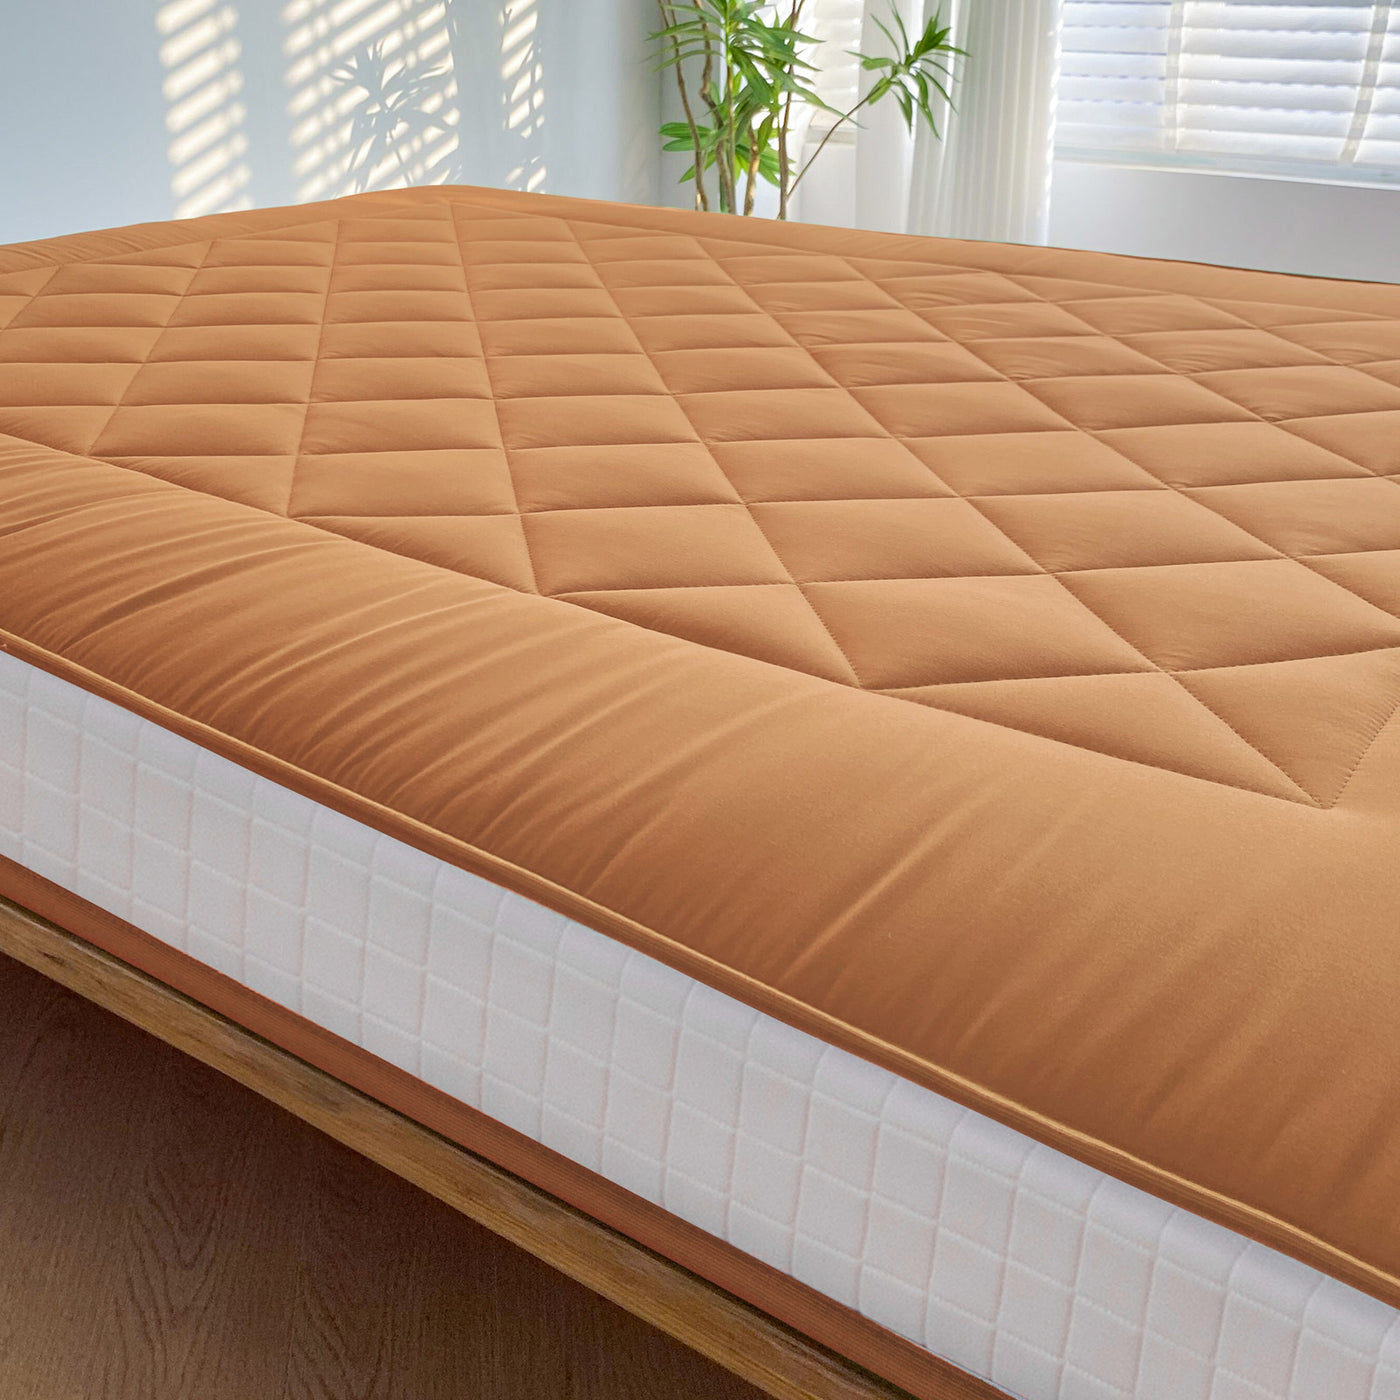 MAXYOYO 6" Extra Thick Japanese Futon Mattress, Stylish Diamond Quilting Floor Bed For Bedroom, Light Brown